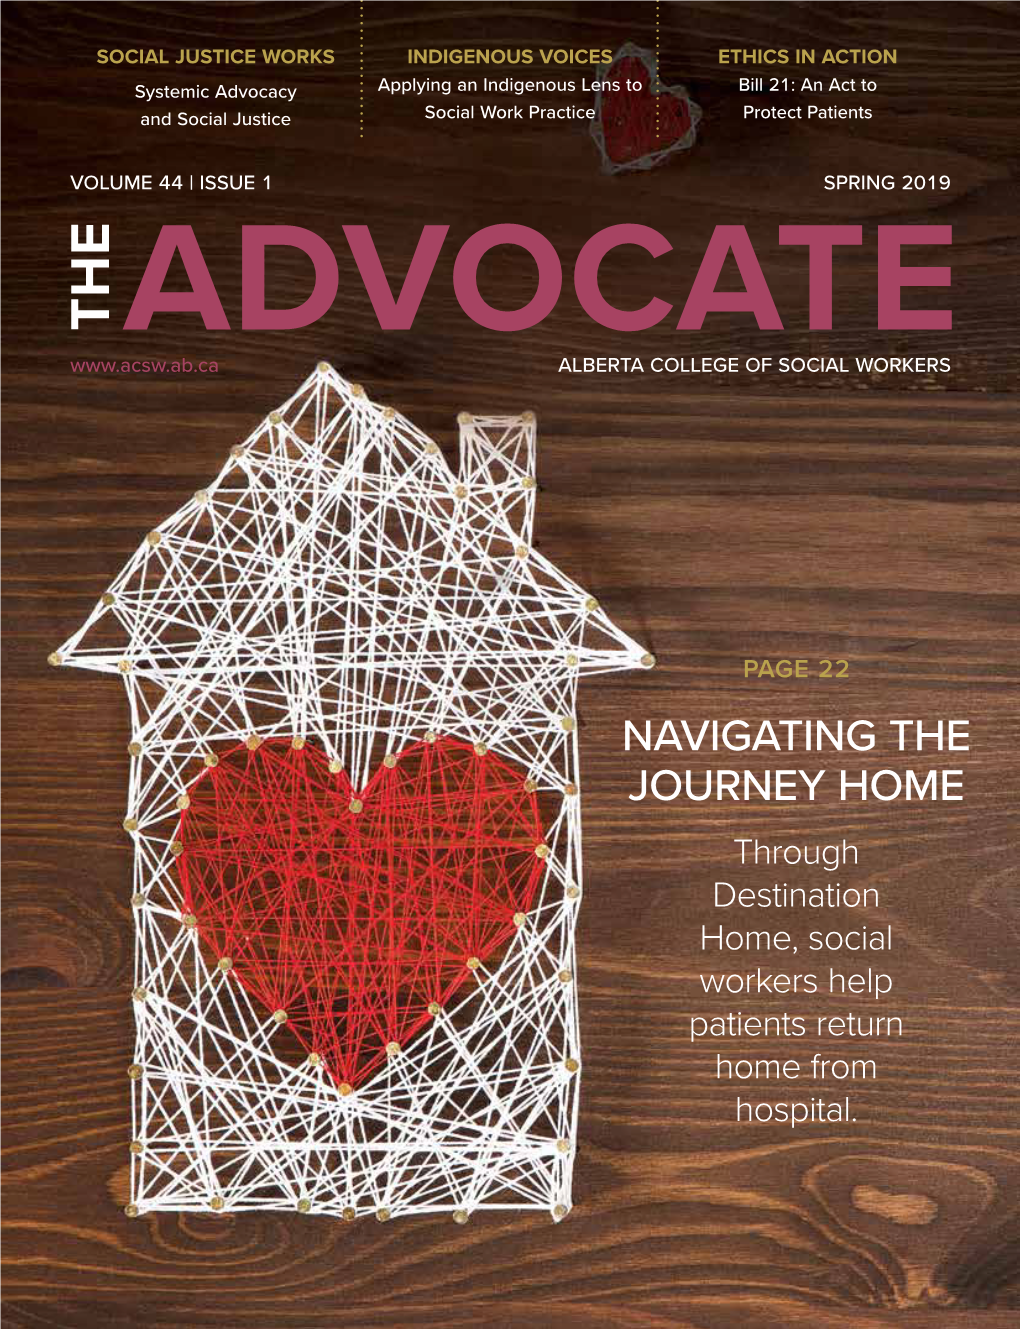 NAVIGATING the JOURNEY HOME Through Destination Home, Social Workers Help Patients Return Home from Hospital